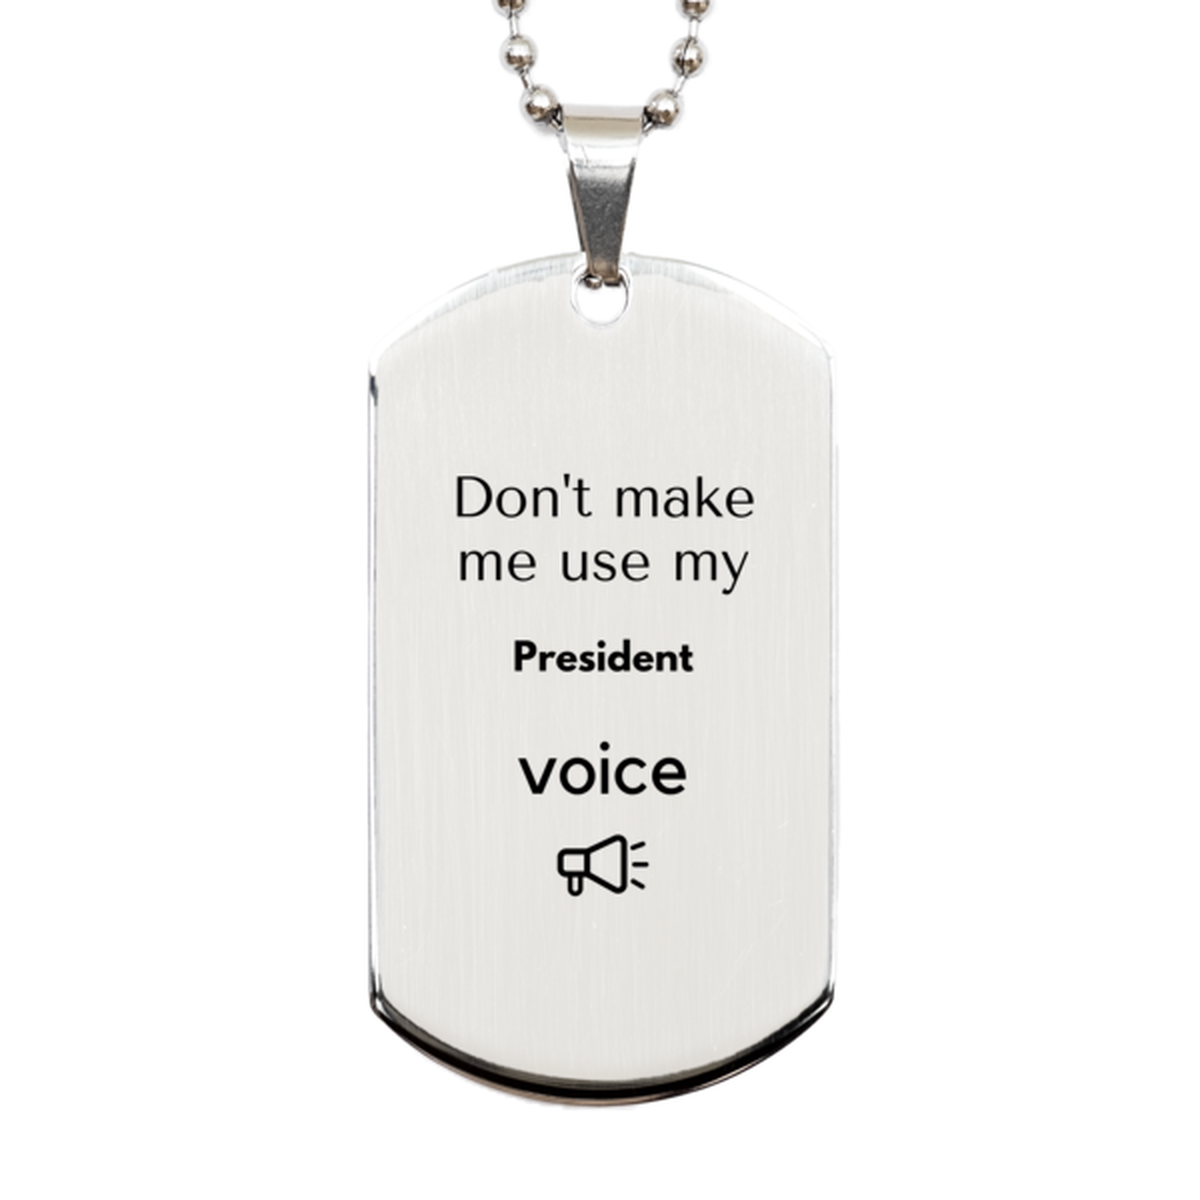 Don't make me use my President voice, Sarcasm President Gifts, Christmas President Silver Dog Tag Birthday Unique Gifts For President Coworkers, Men, Women, Colleague, Friends